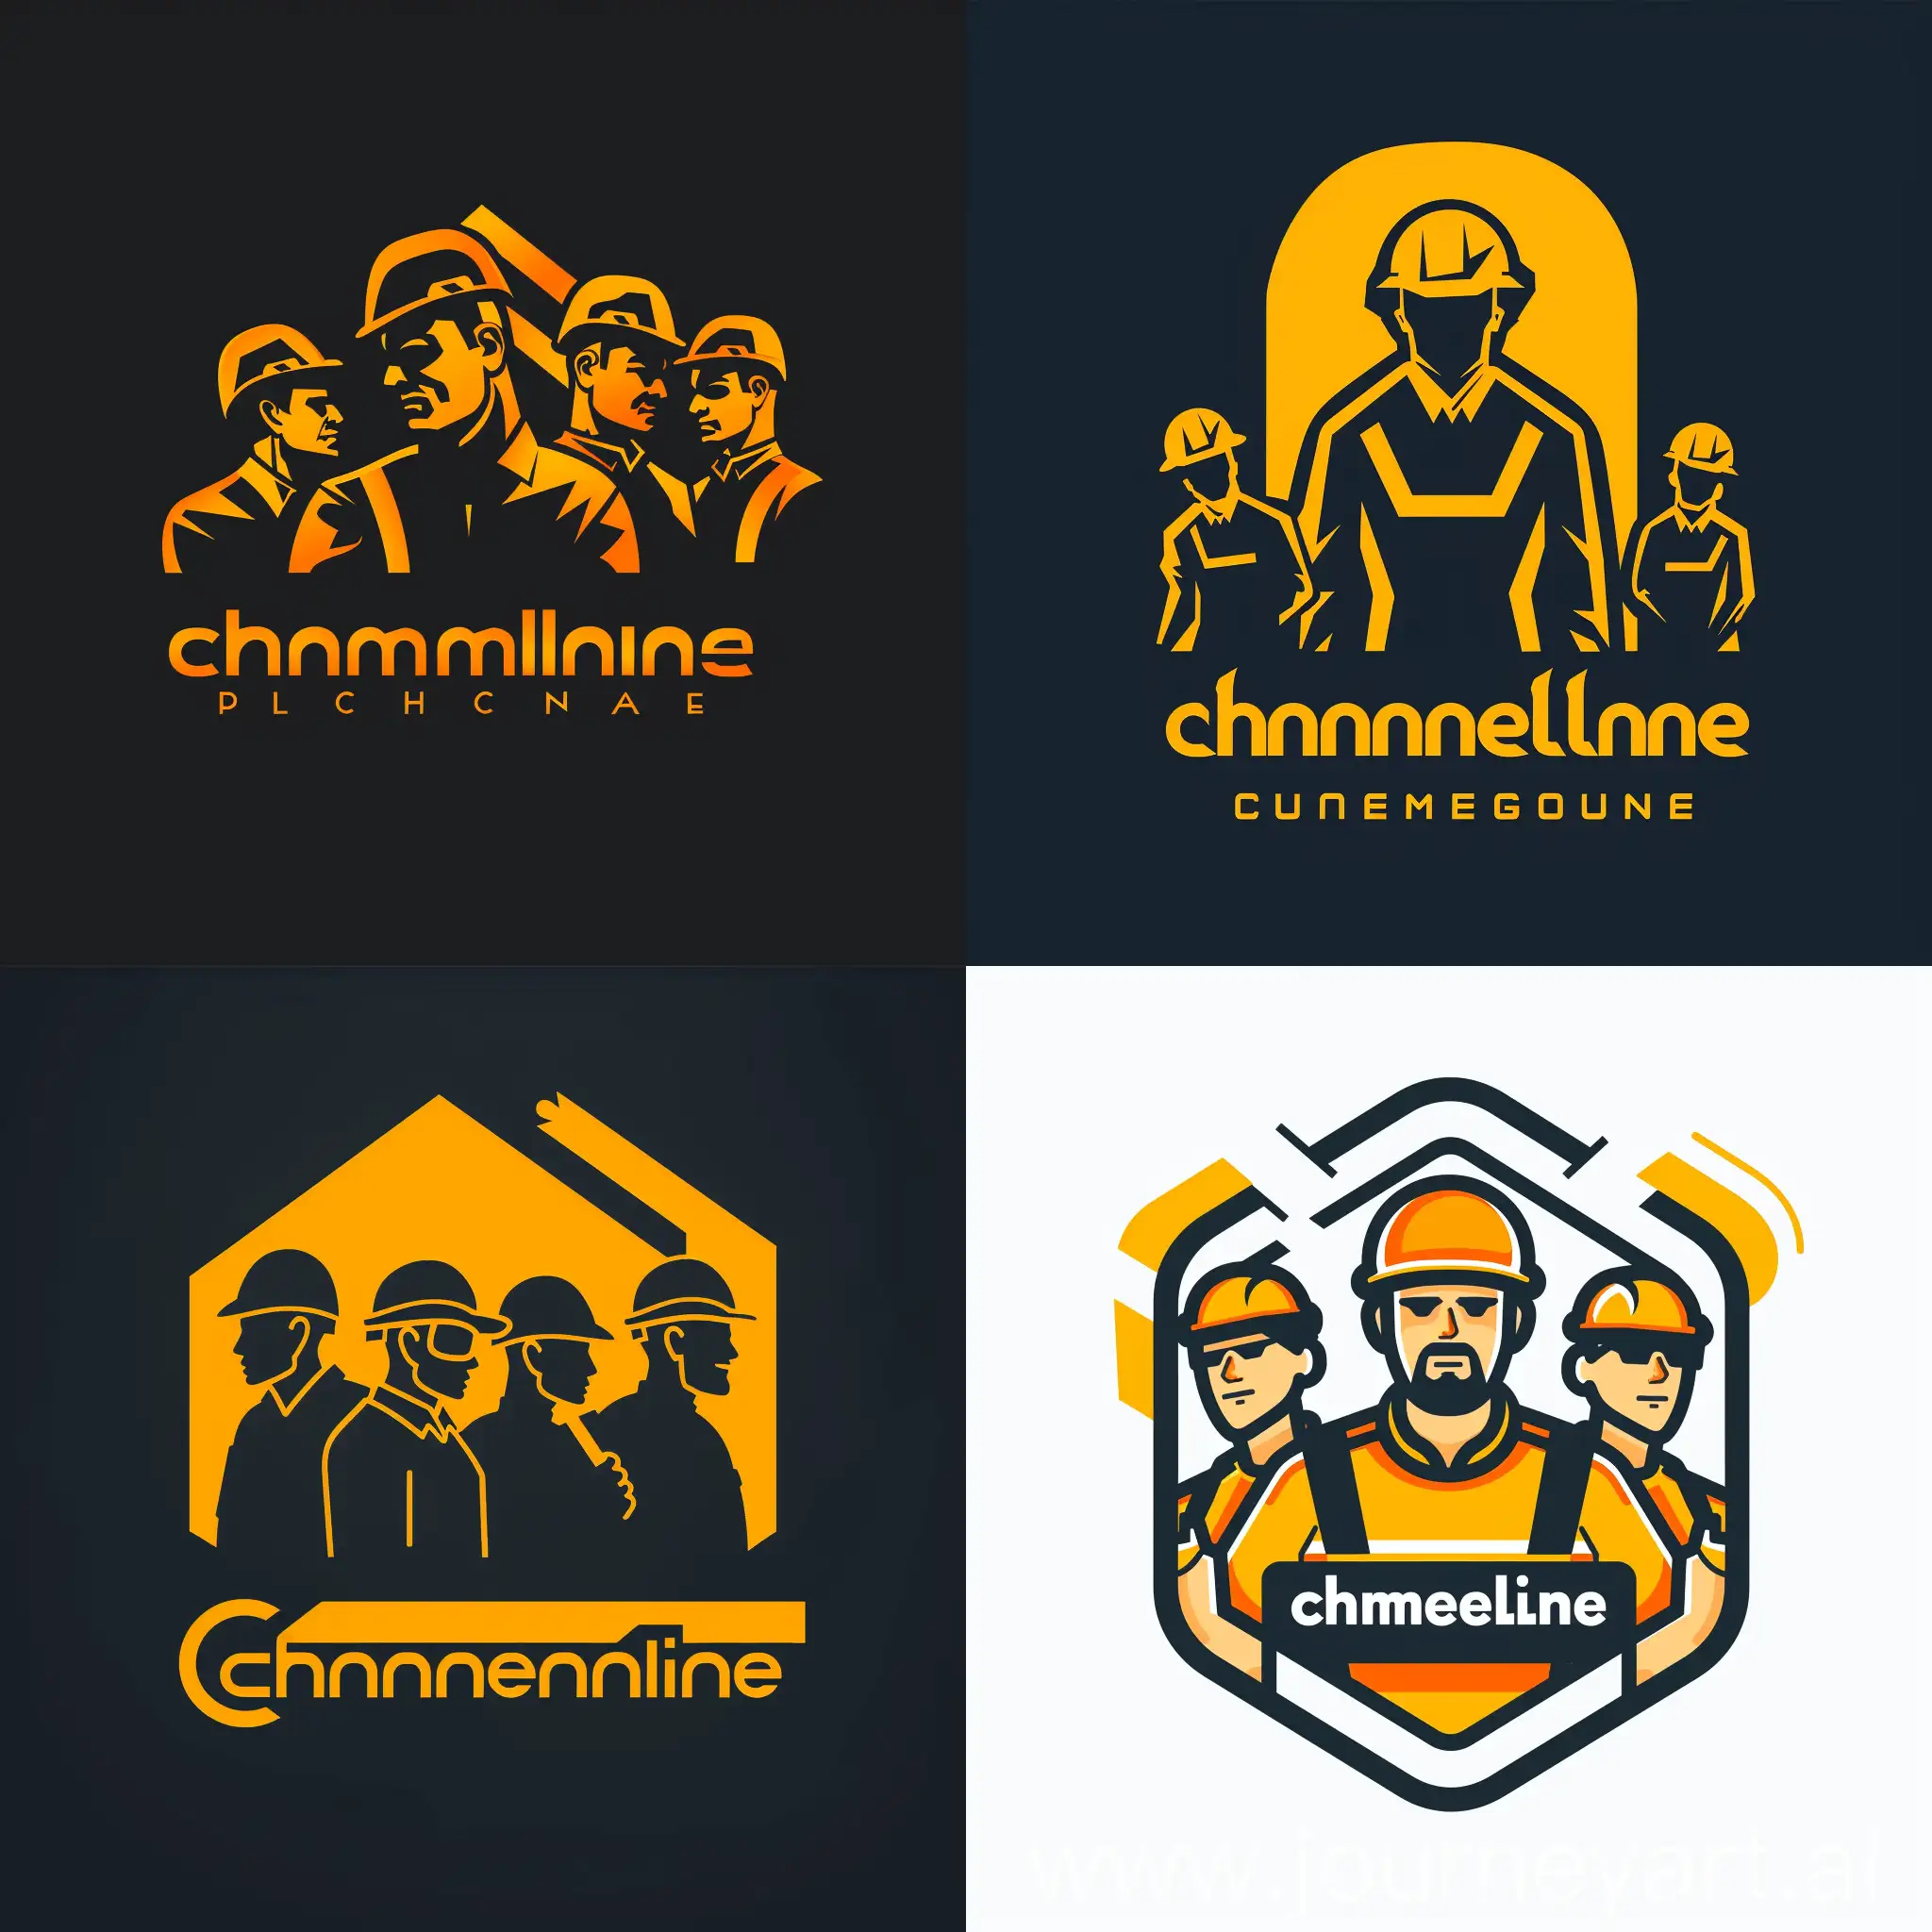 Hardworking-Construction-Workers-Logo-for-Chamberline-Building-and-Civil-Engineering-Company